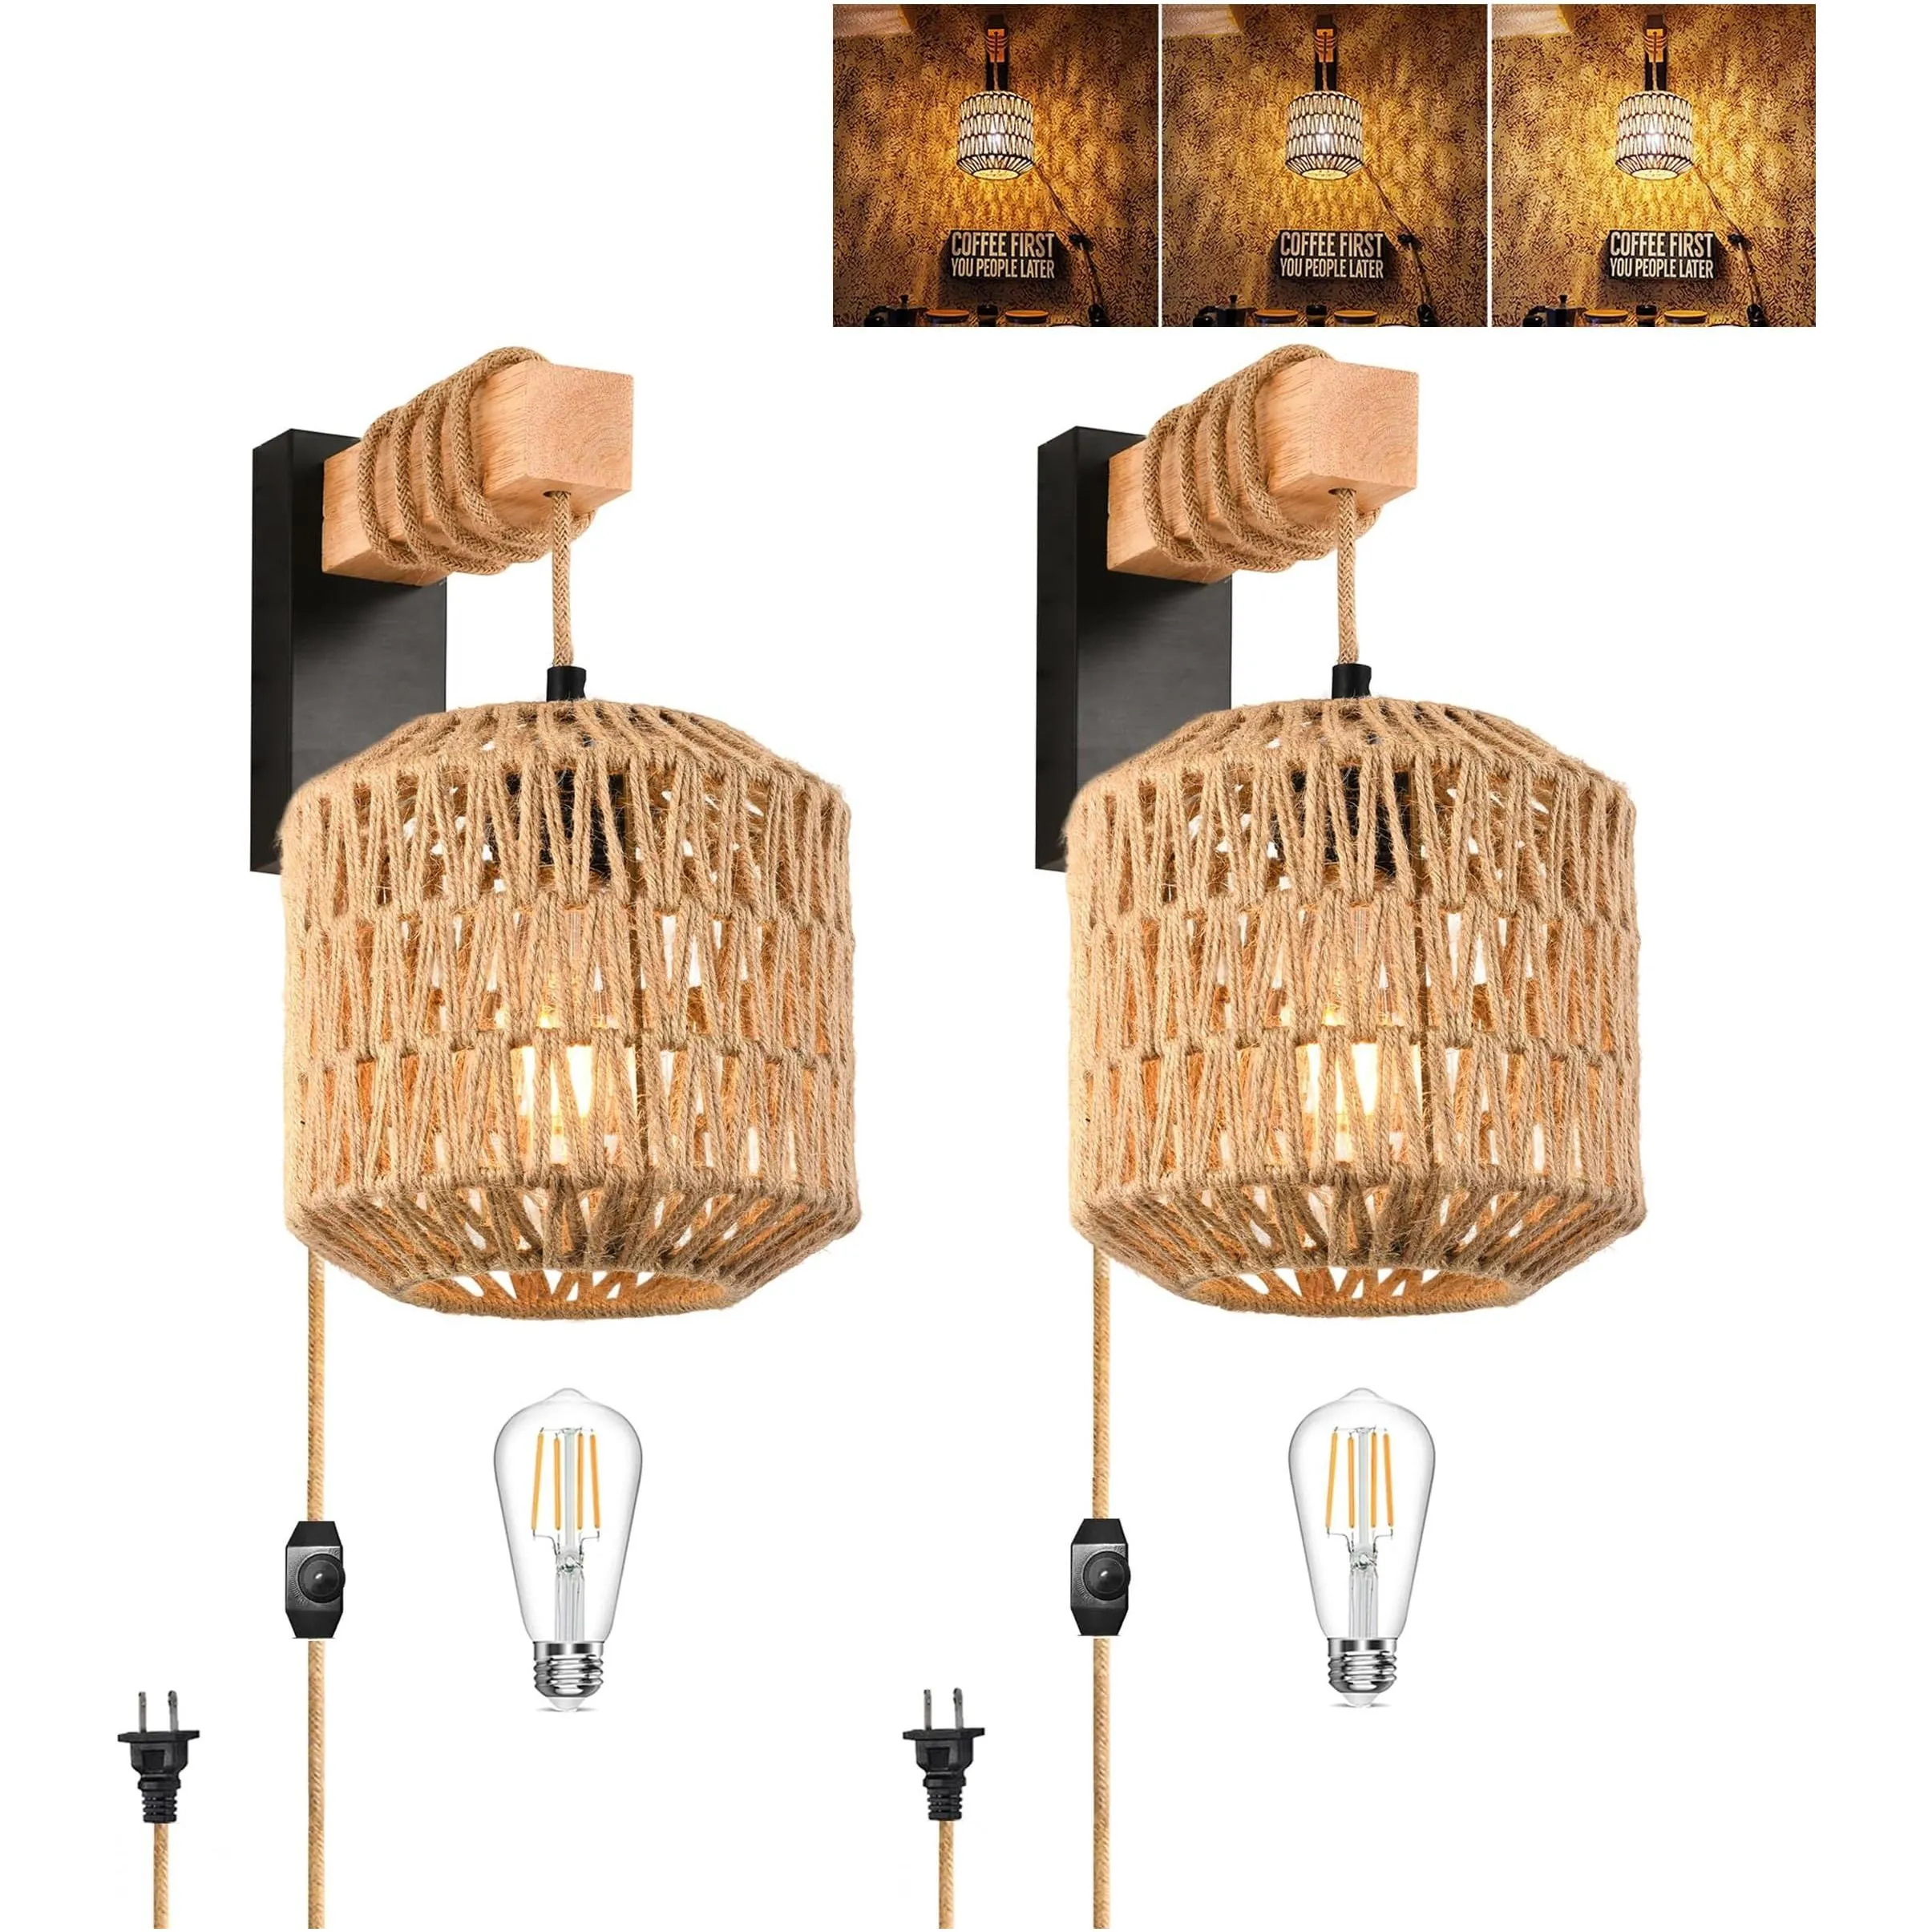 Security Lighting Plug In Wall Sconces Set Of Two Hand Rattan Boho Lamp With Cord Woven Decor Hanging Drop Delivery Lights Outdoor Otdml